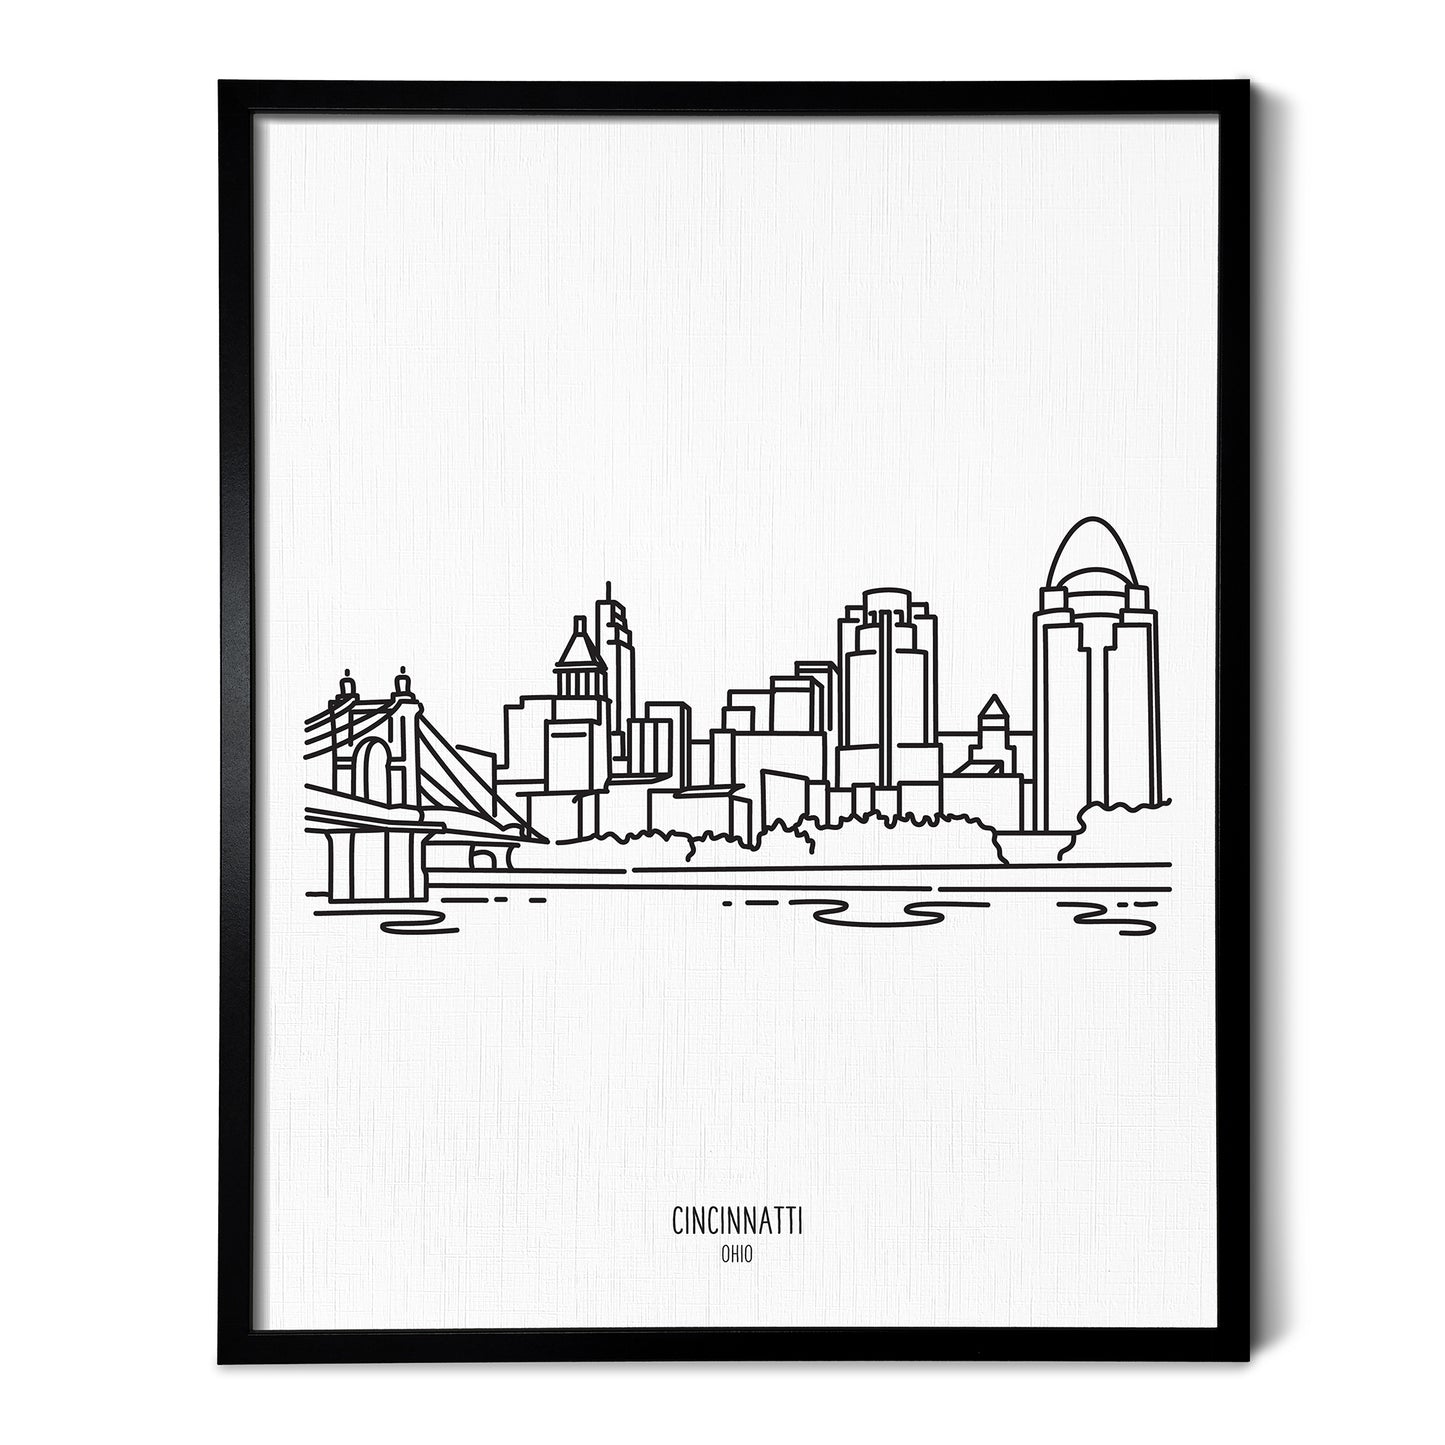 A line art drawing of the Cincinnati Ohio Skyline on white linen paper in a thin black picture frame